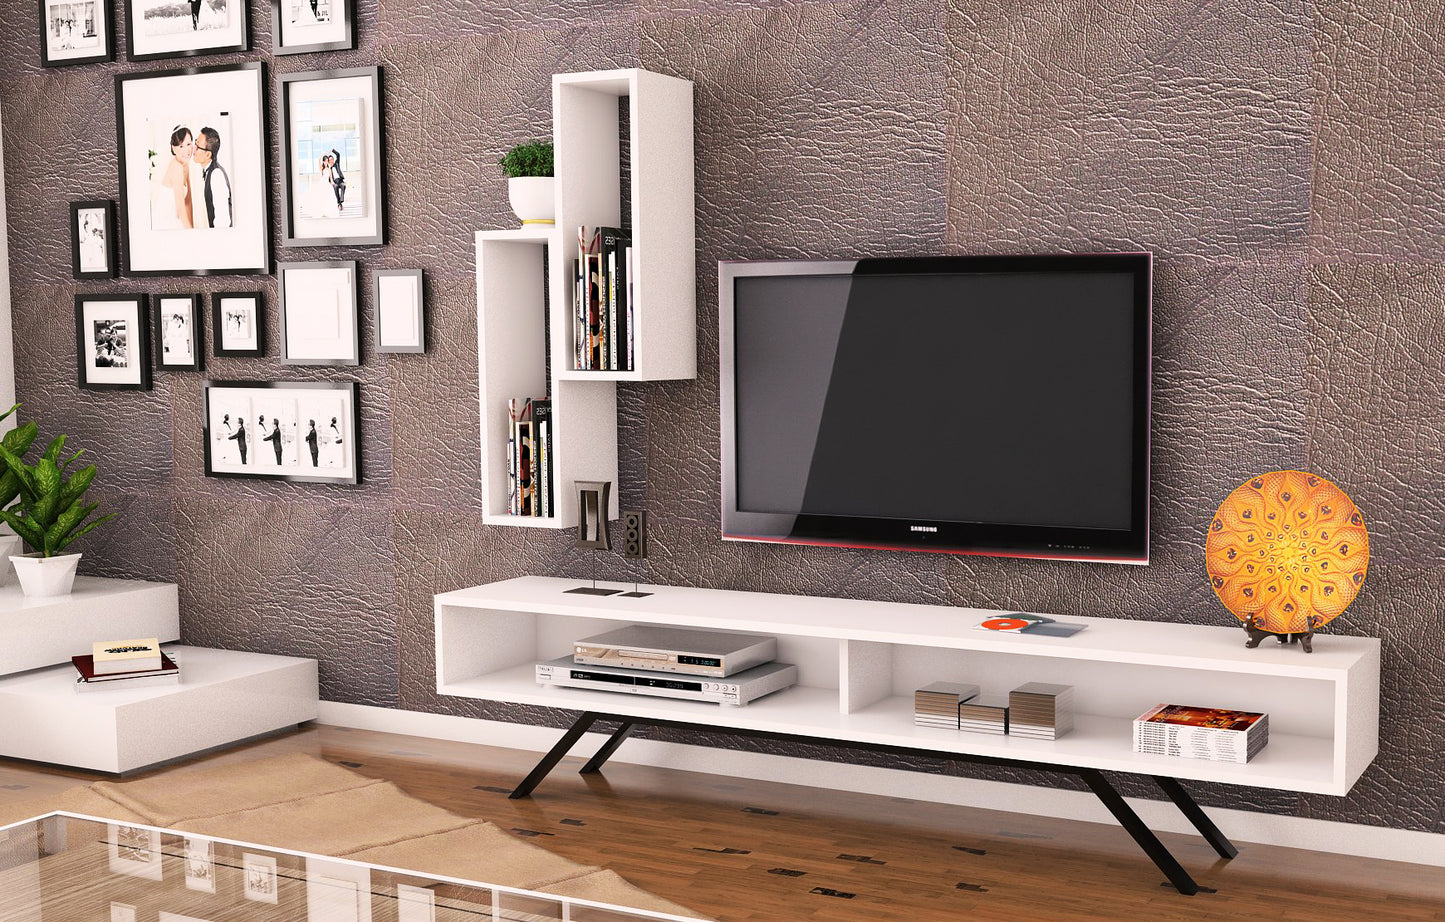 Ece Iron Footed Tv Unit - White